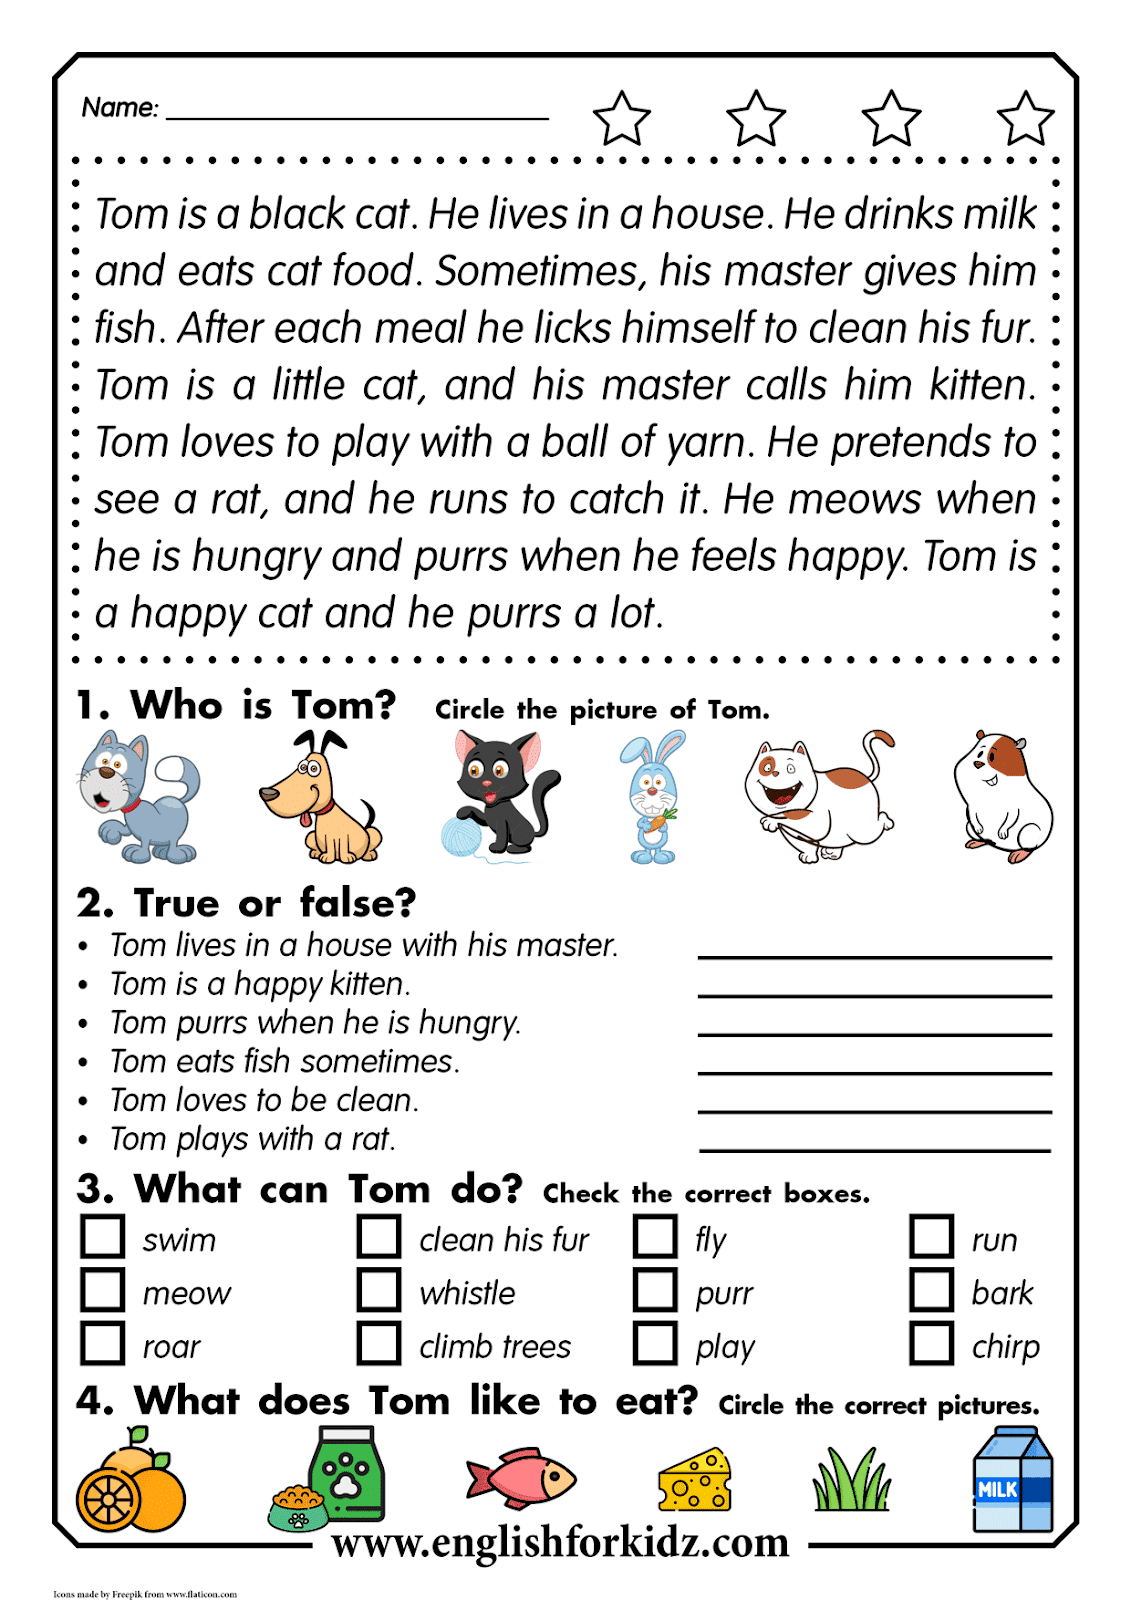 English For Kids Step By Step Reading Comprehension Worksheets Thomas 